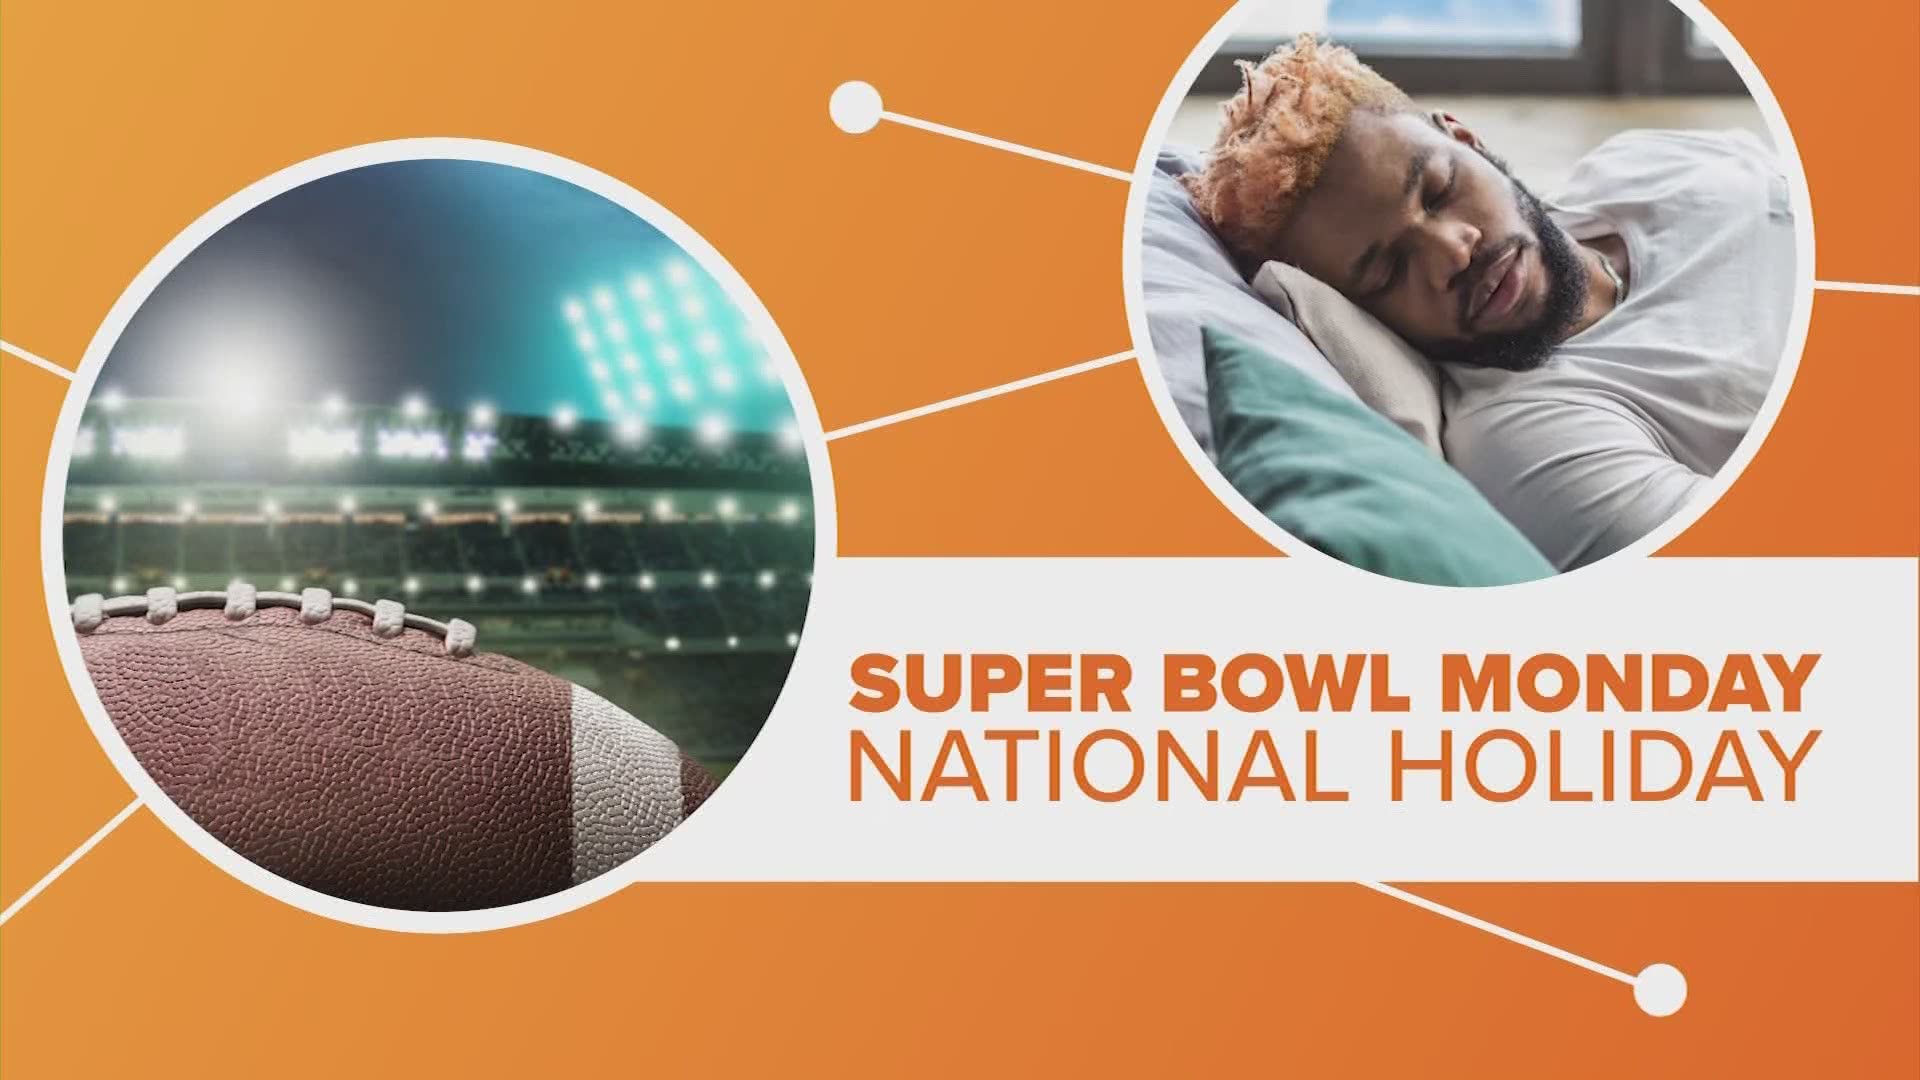 After a day of cheering and eating all that delicious game food on Super Bowl, it's tough getting to work the next morning. How's a Super Bowl Monday off-day sound?